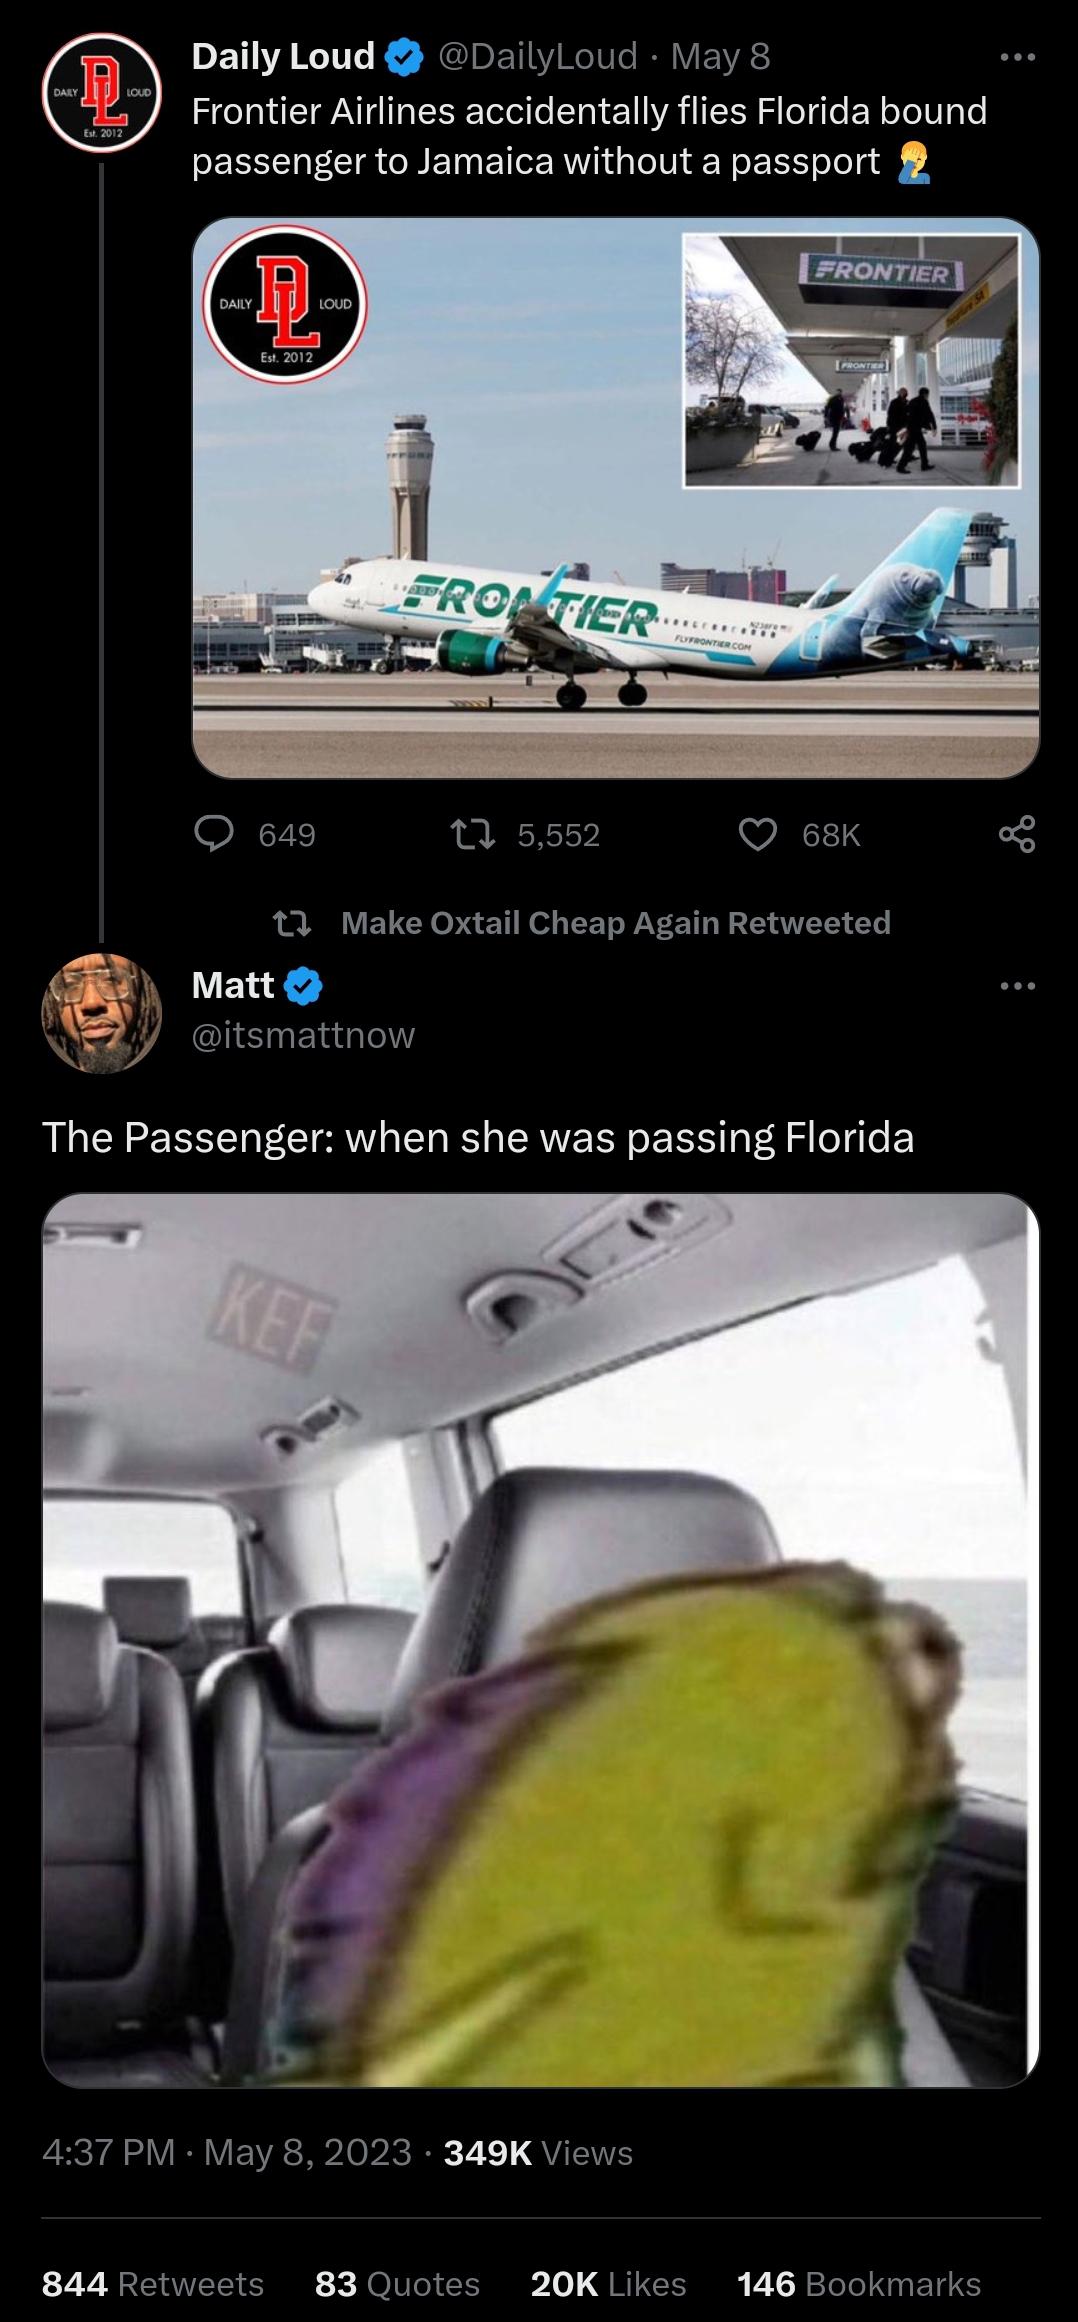 funny tweets and memes - screenshot - Daily Hsd Est. 2012 Loud Daily Loud May 8 Frontier Airlines accidentally flies Florida bound passenger to Jamaica without a passport D Daily Est. 2012 649 Matt Loud Frontier 5,552 Kef Flyfrontier.Com Frontier Make Oxt